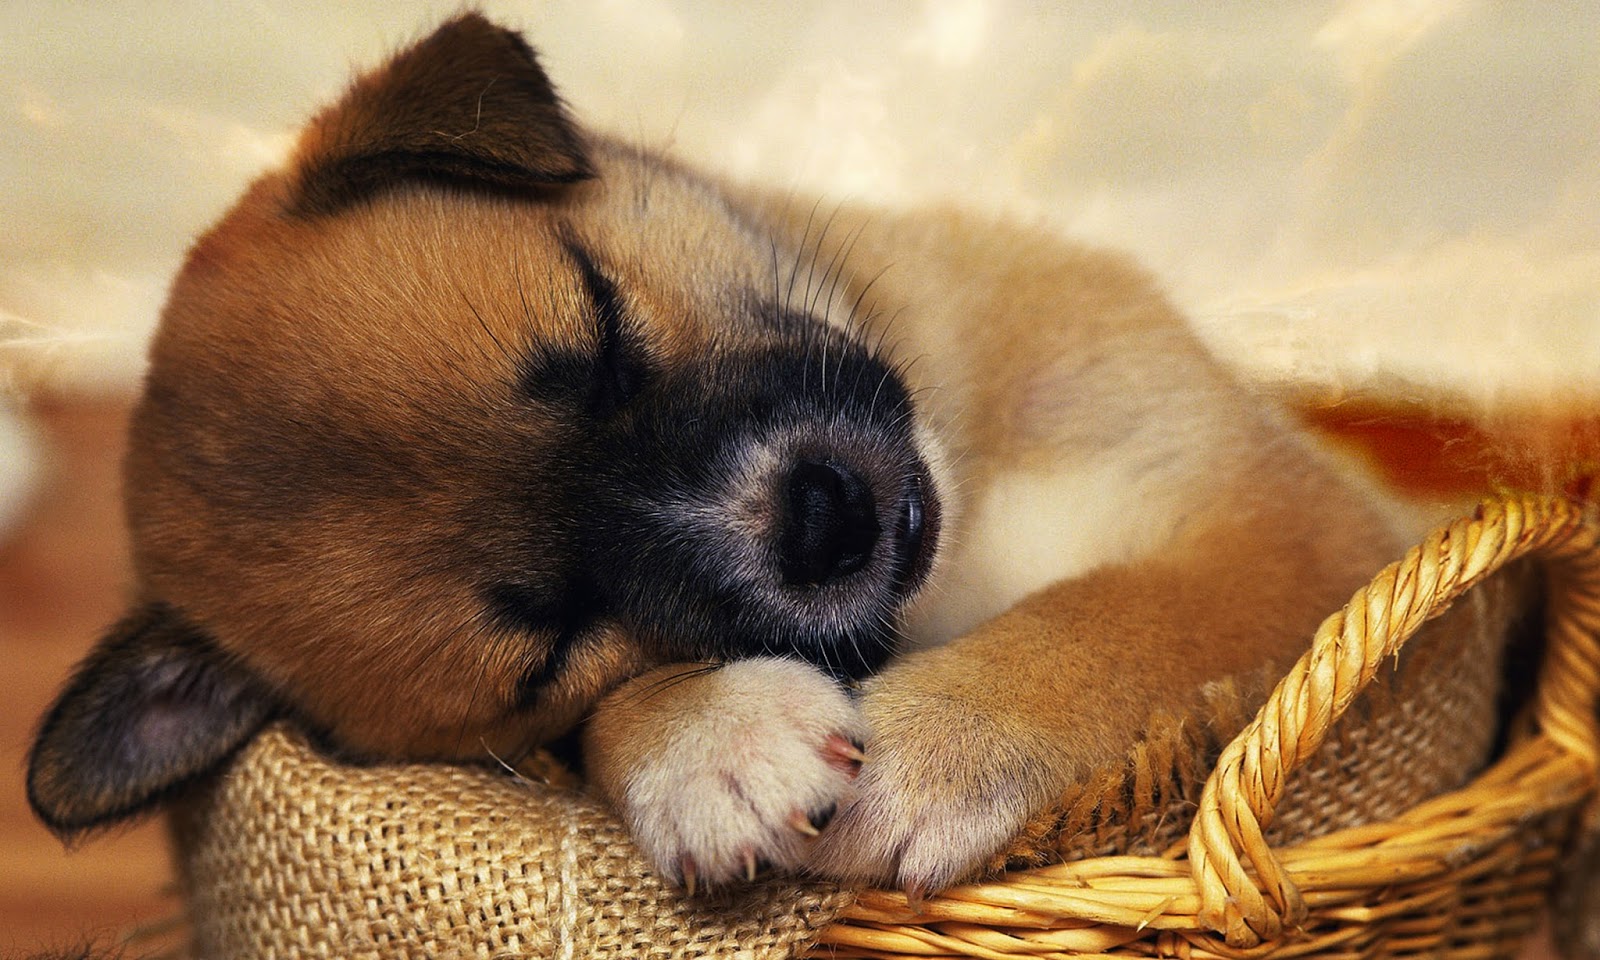  Puppy  Photography 1080p Wallpapers 